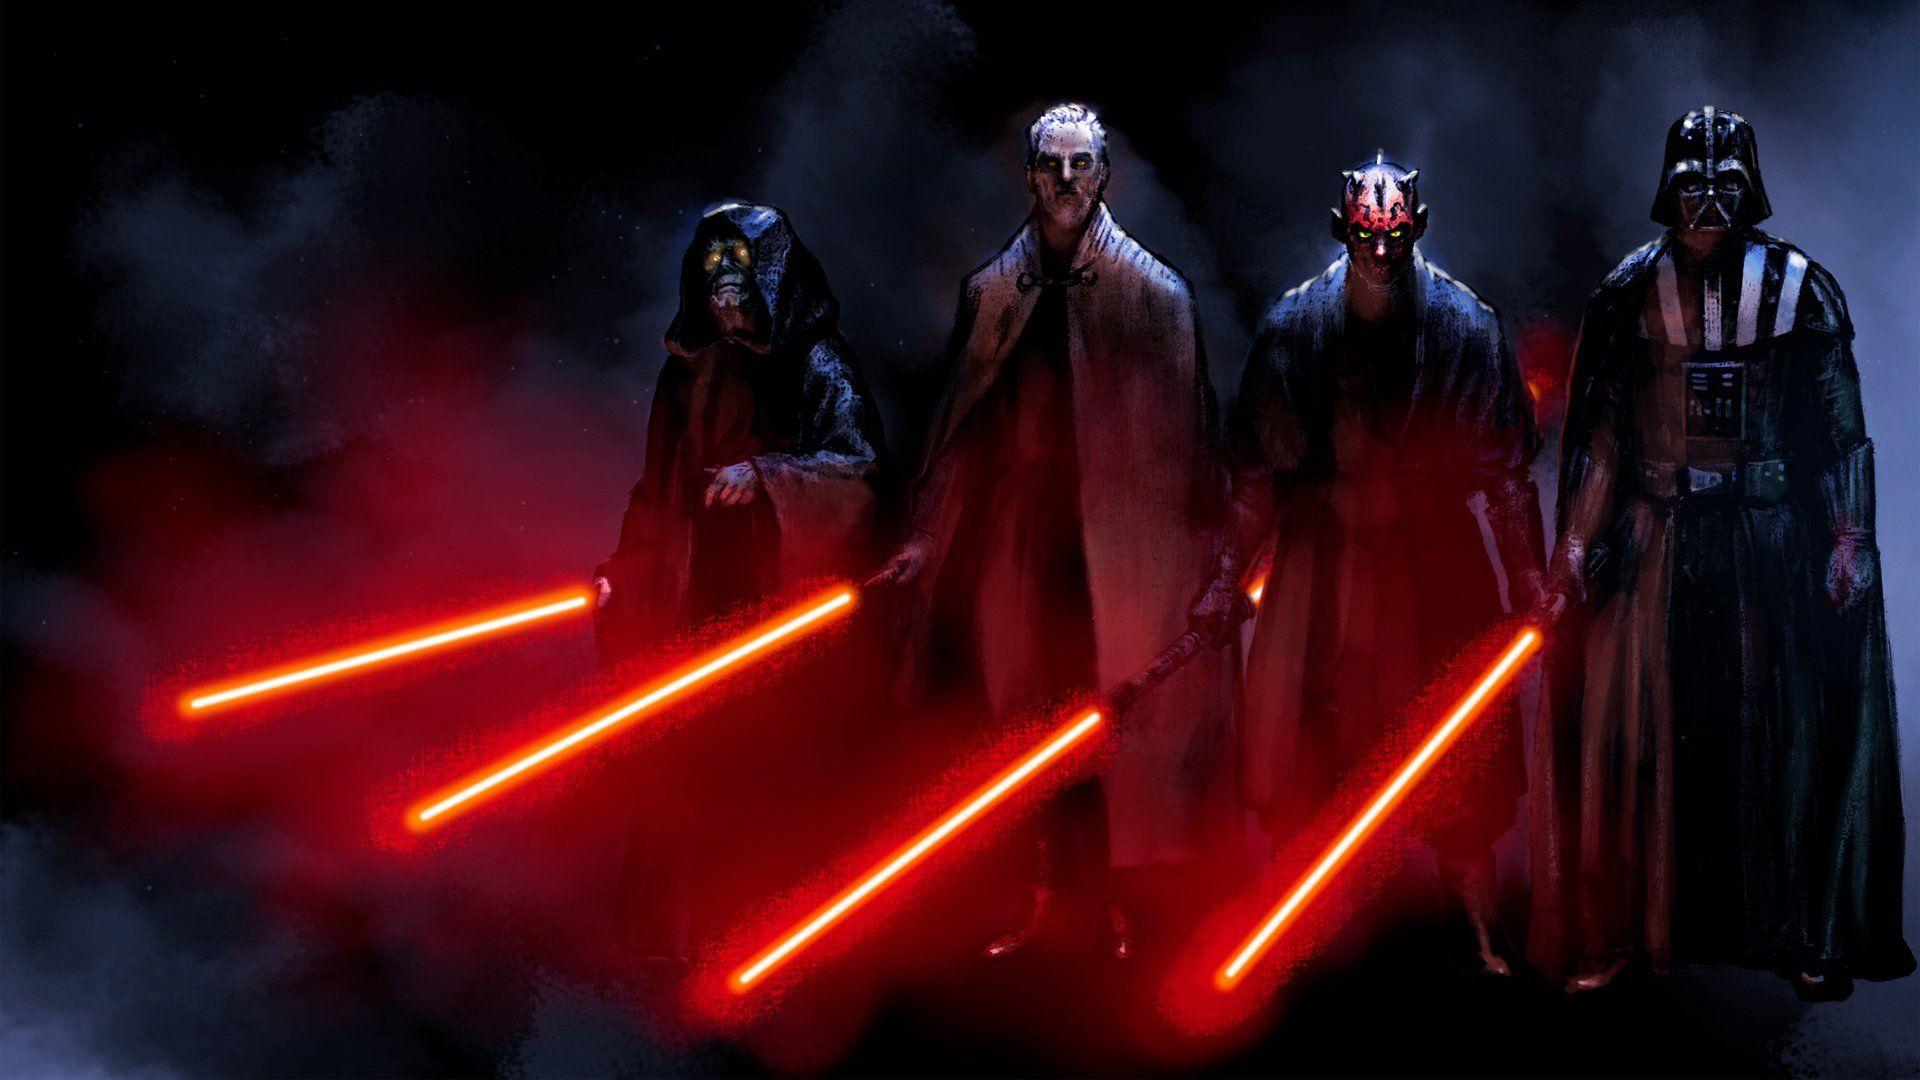 Sith Wallpaper Free Sith Background